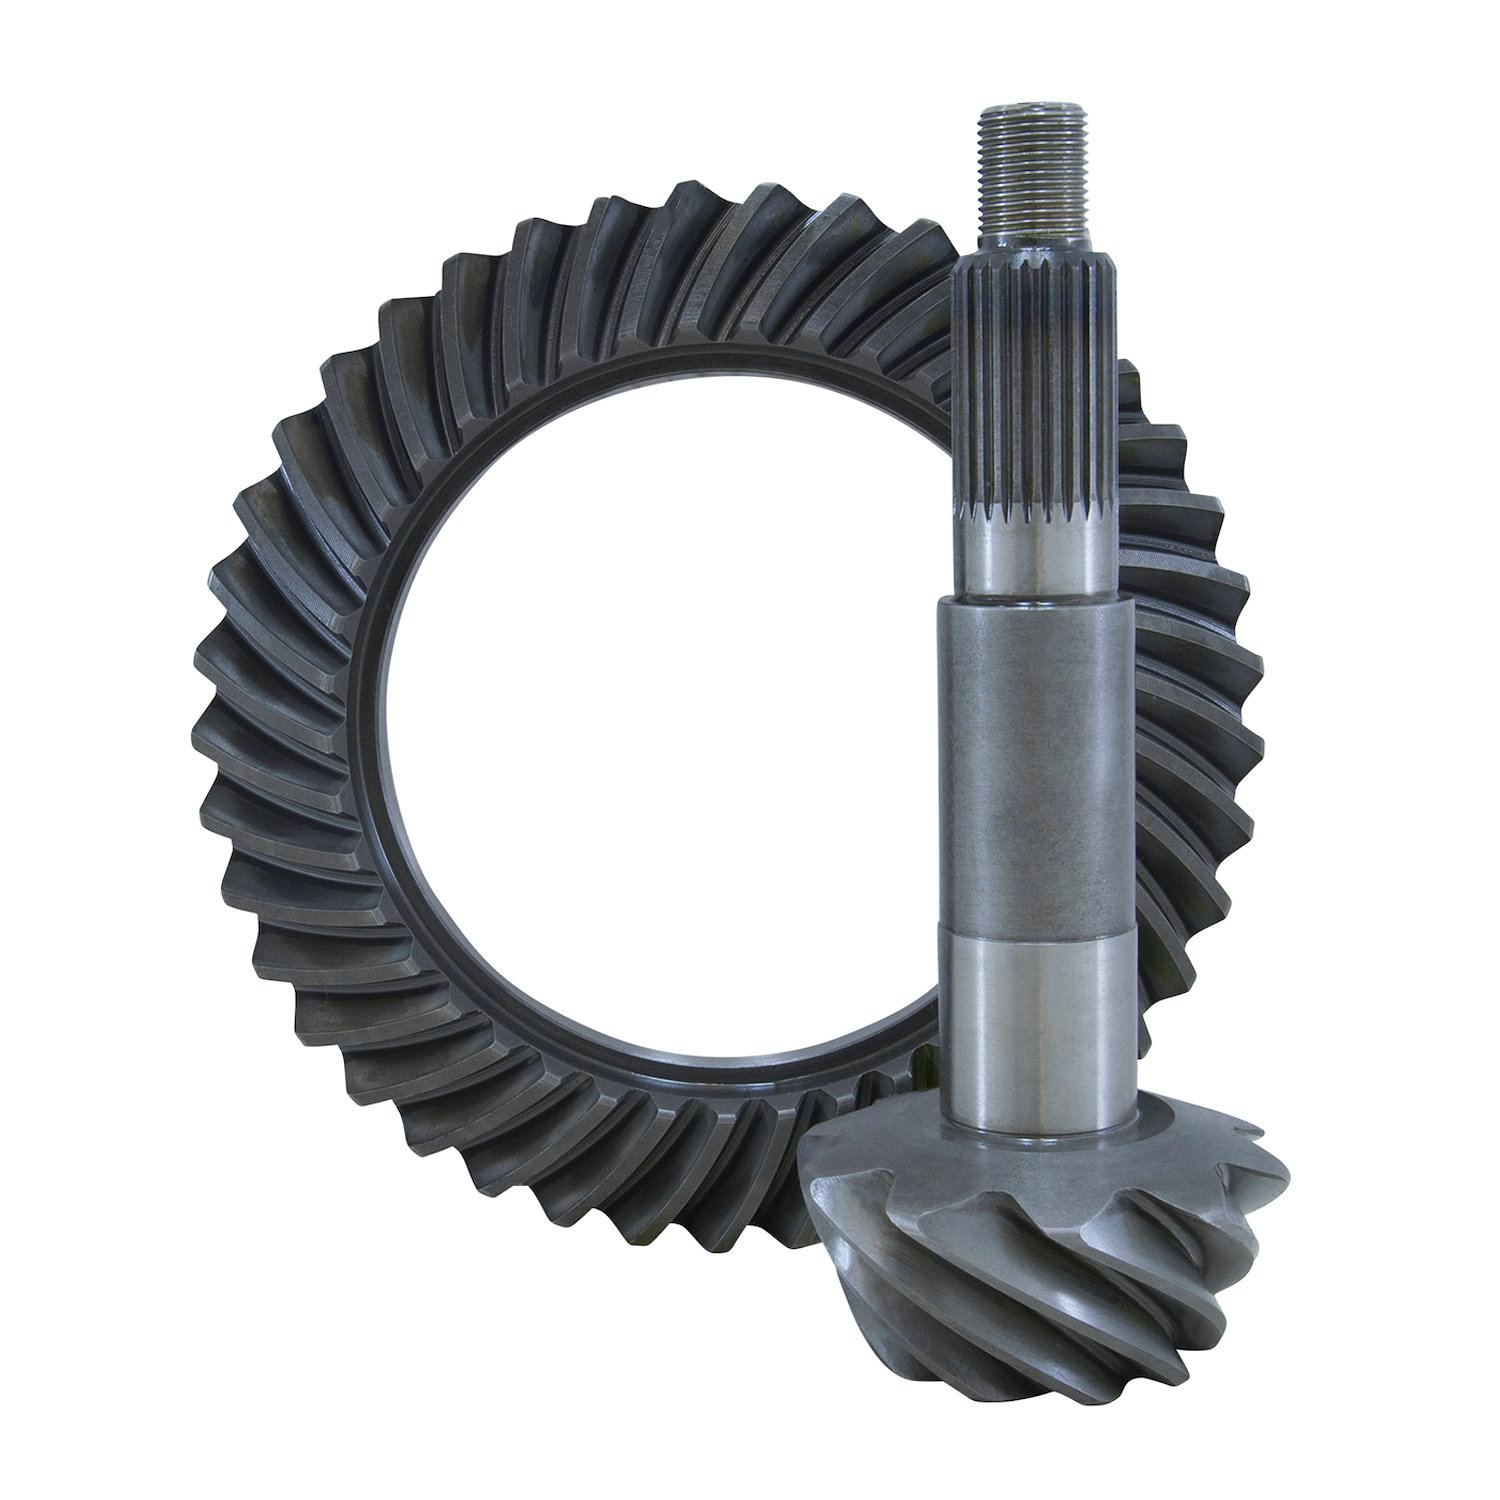 USA Standard 36046 Replacement Ring & Pinion Gear